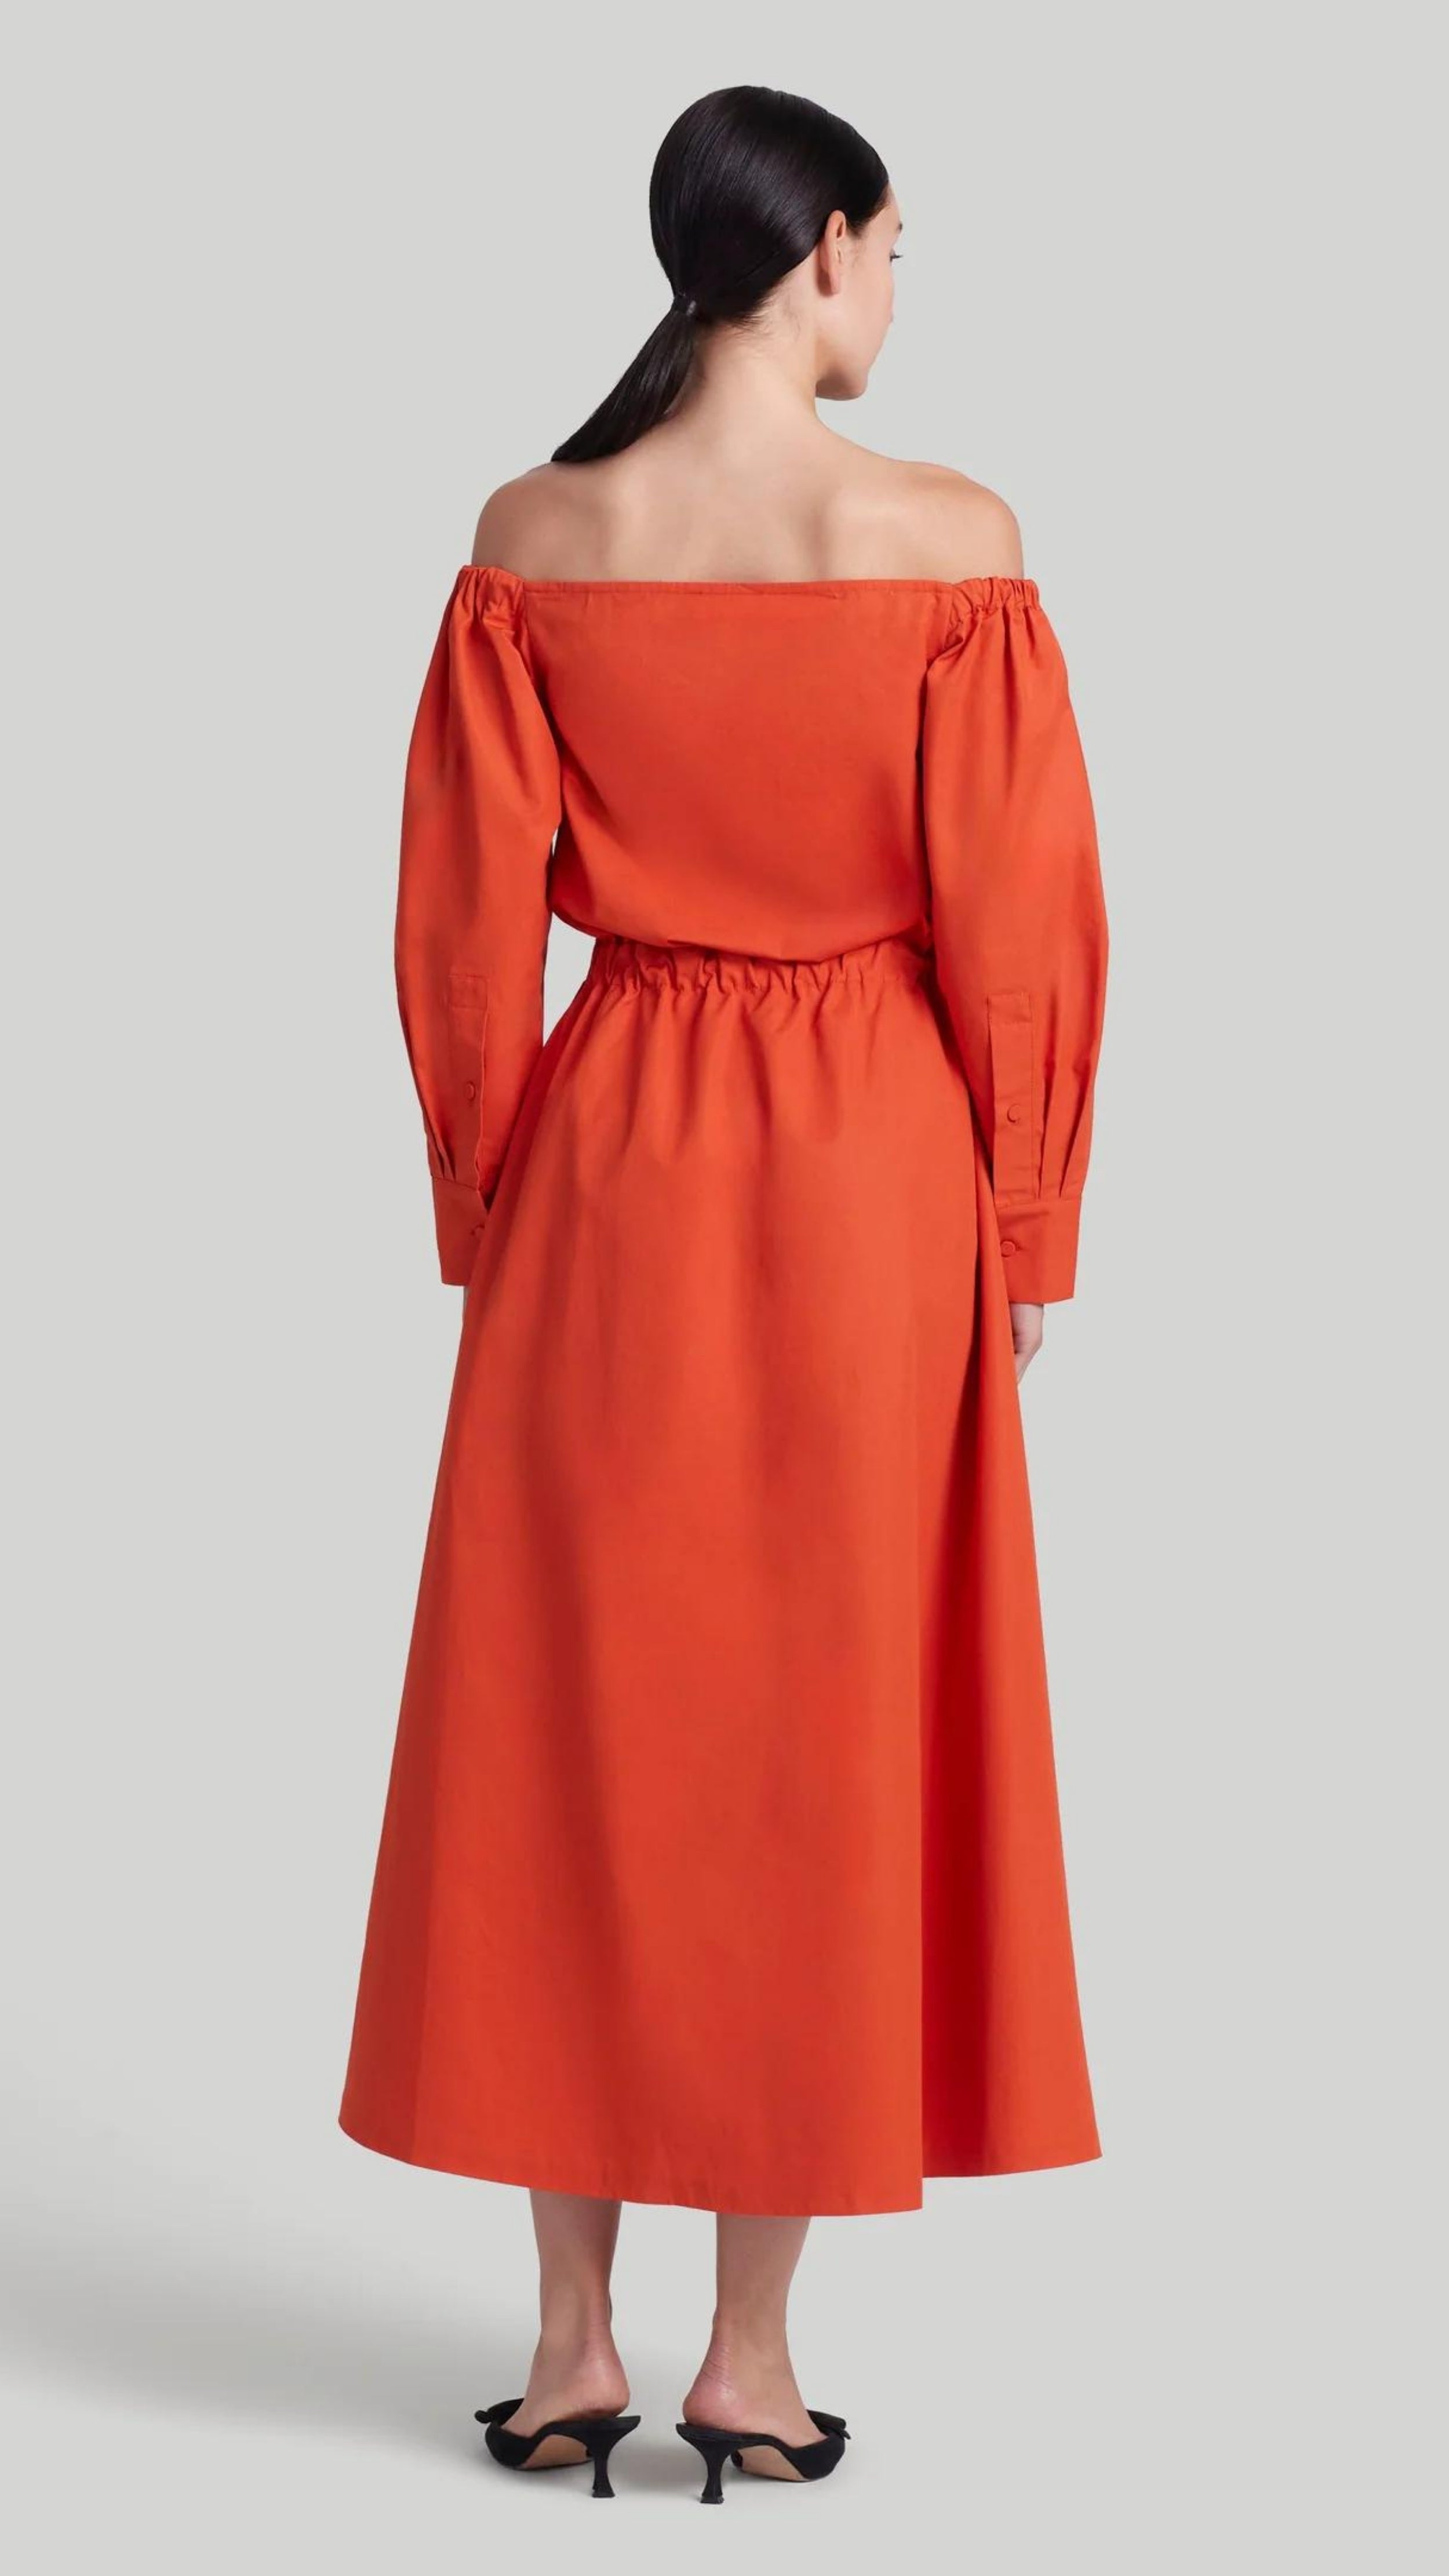 Altuzarra Zora dress shirt dress style soft cotton midi dress in red orange color. Made in Italy. The dress has off the shoulder neckline, puff sleeves and an elasticated waist waistband. Shown on model facing back